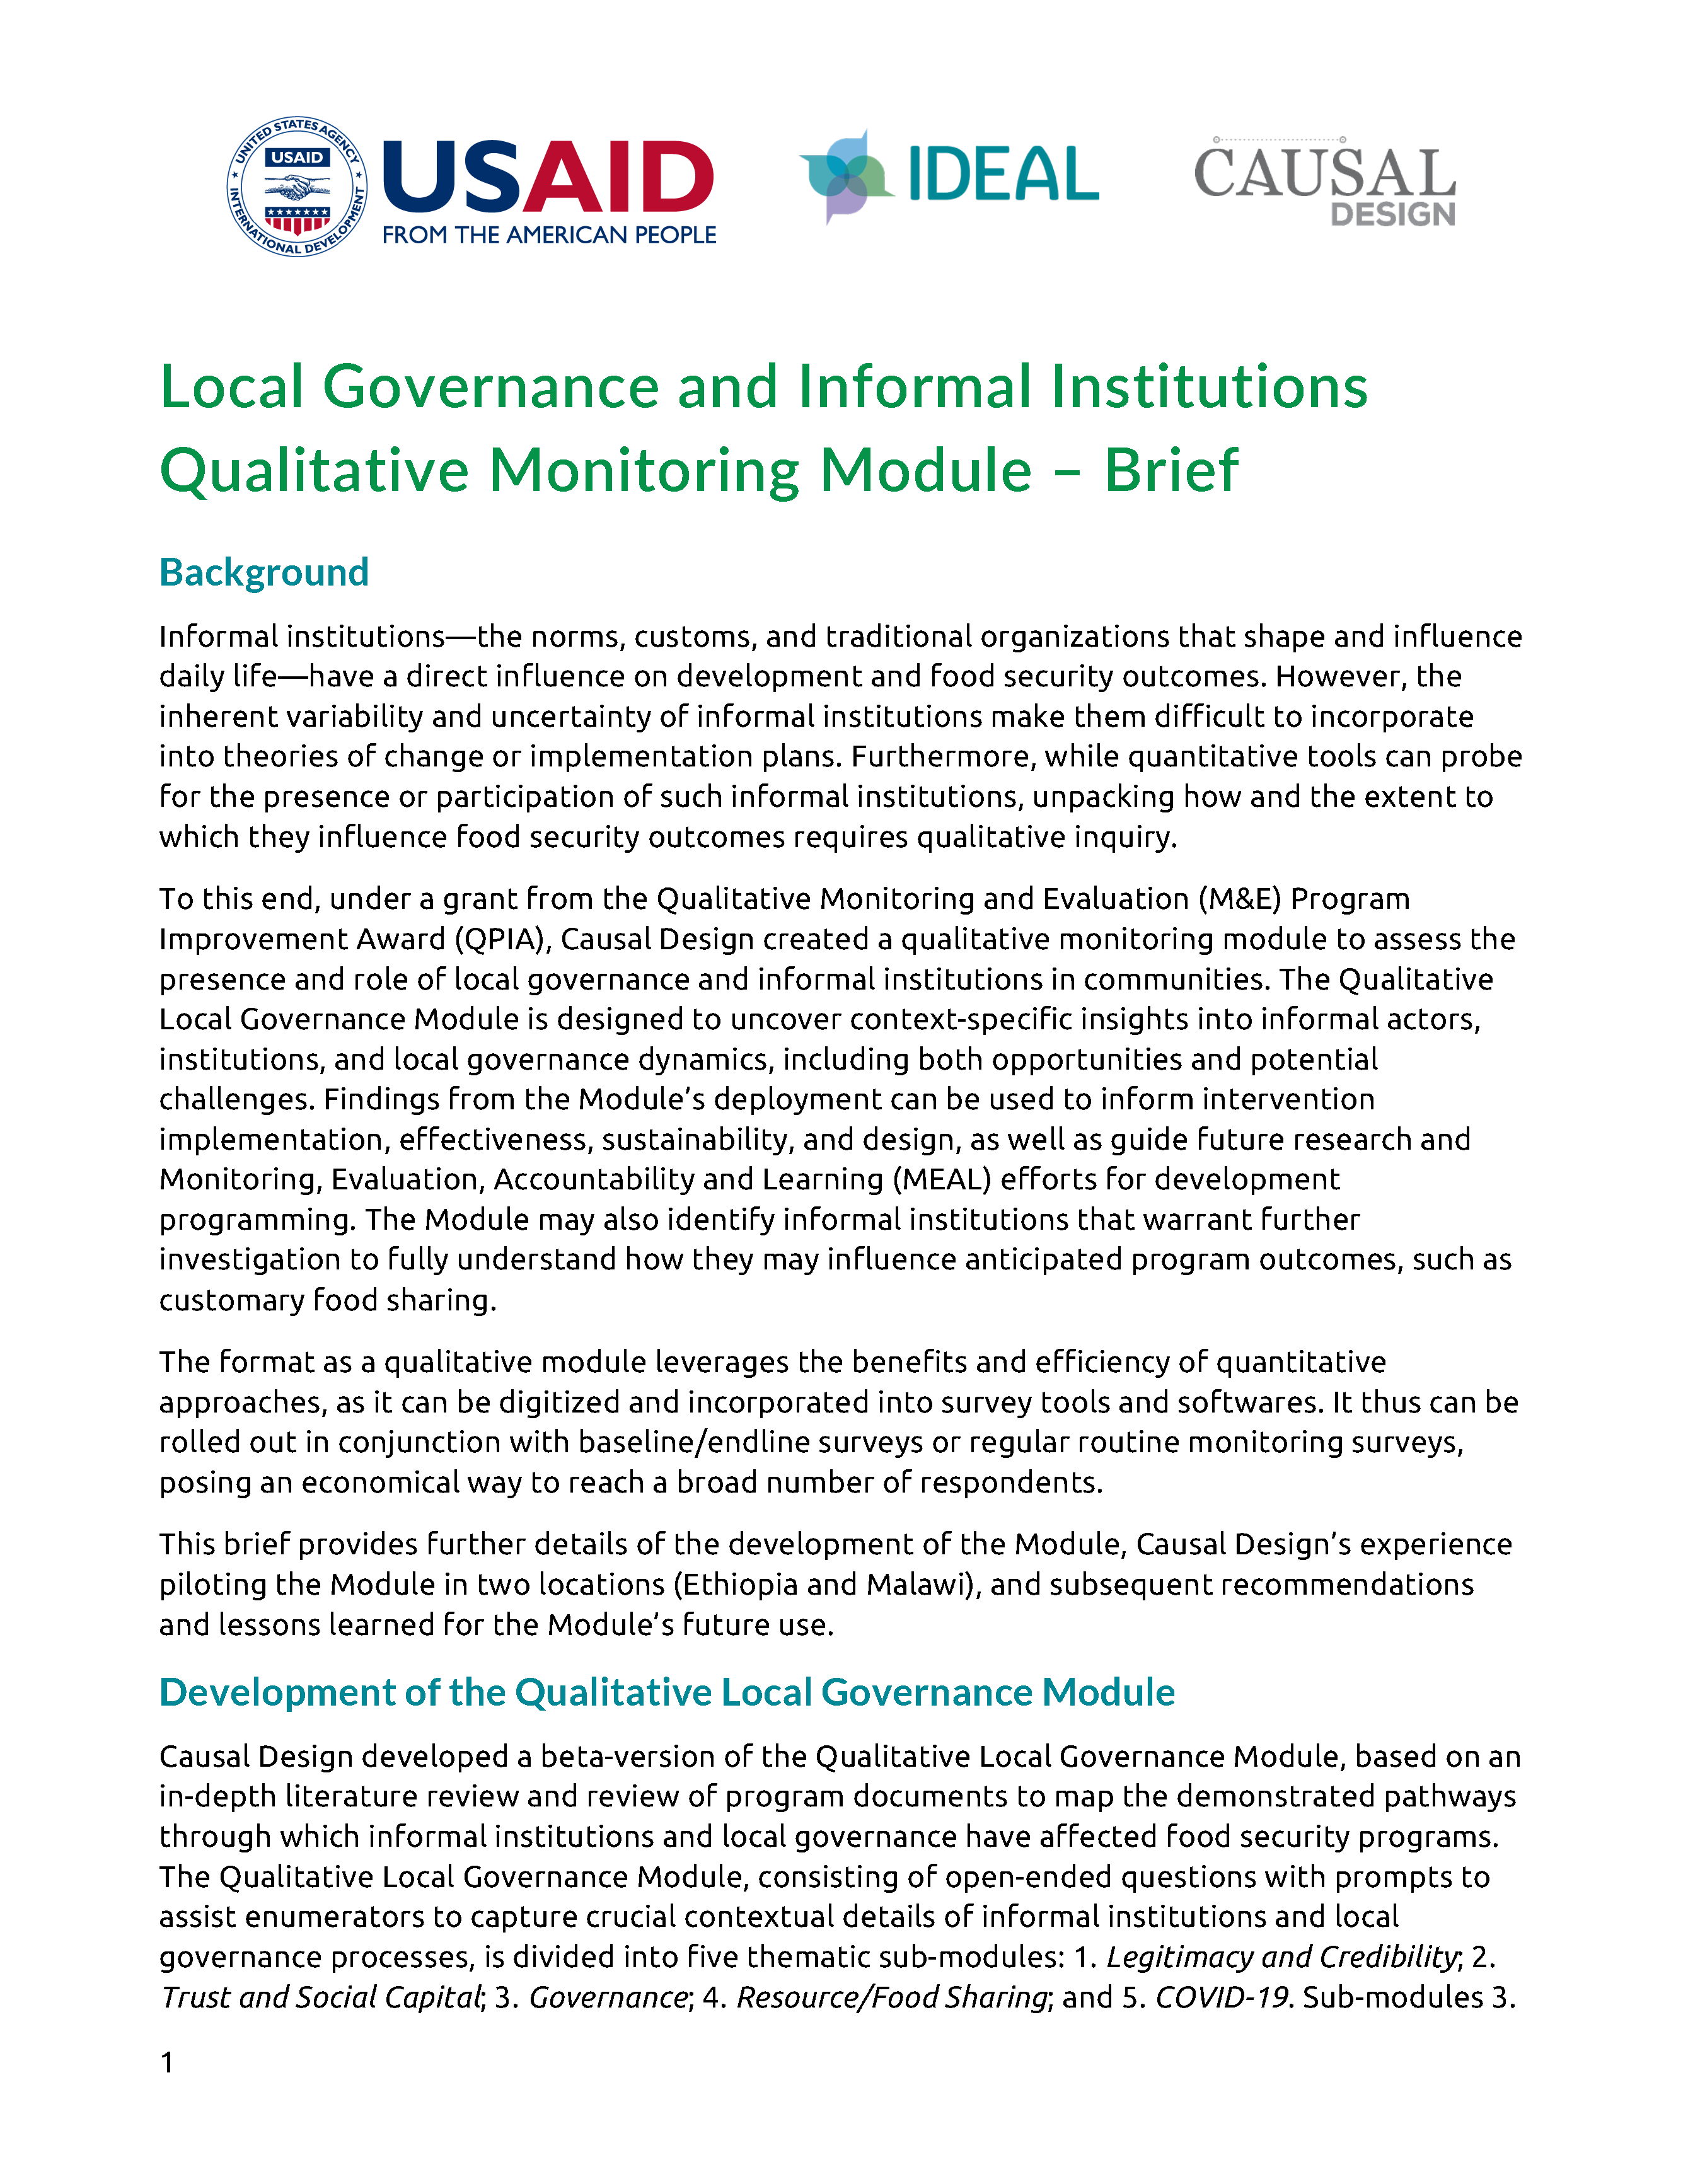 Cover page for Local Governance and Informal Institutions Qualitative Monitoring Module – Brief